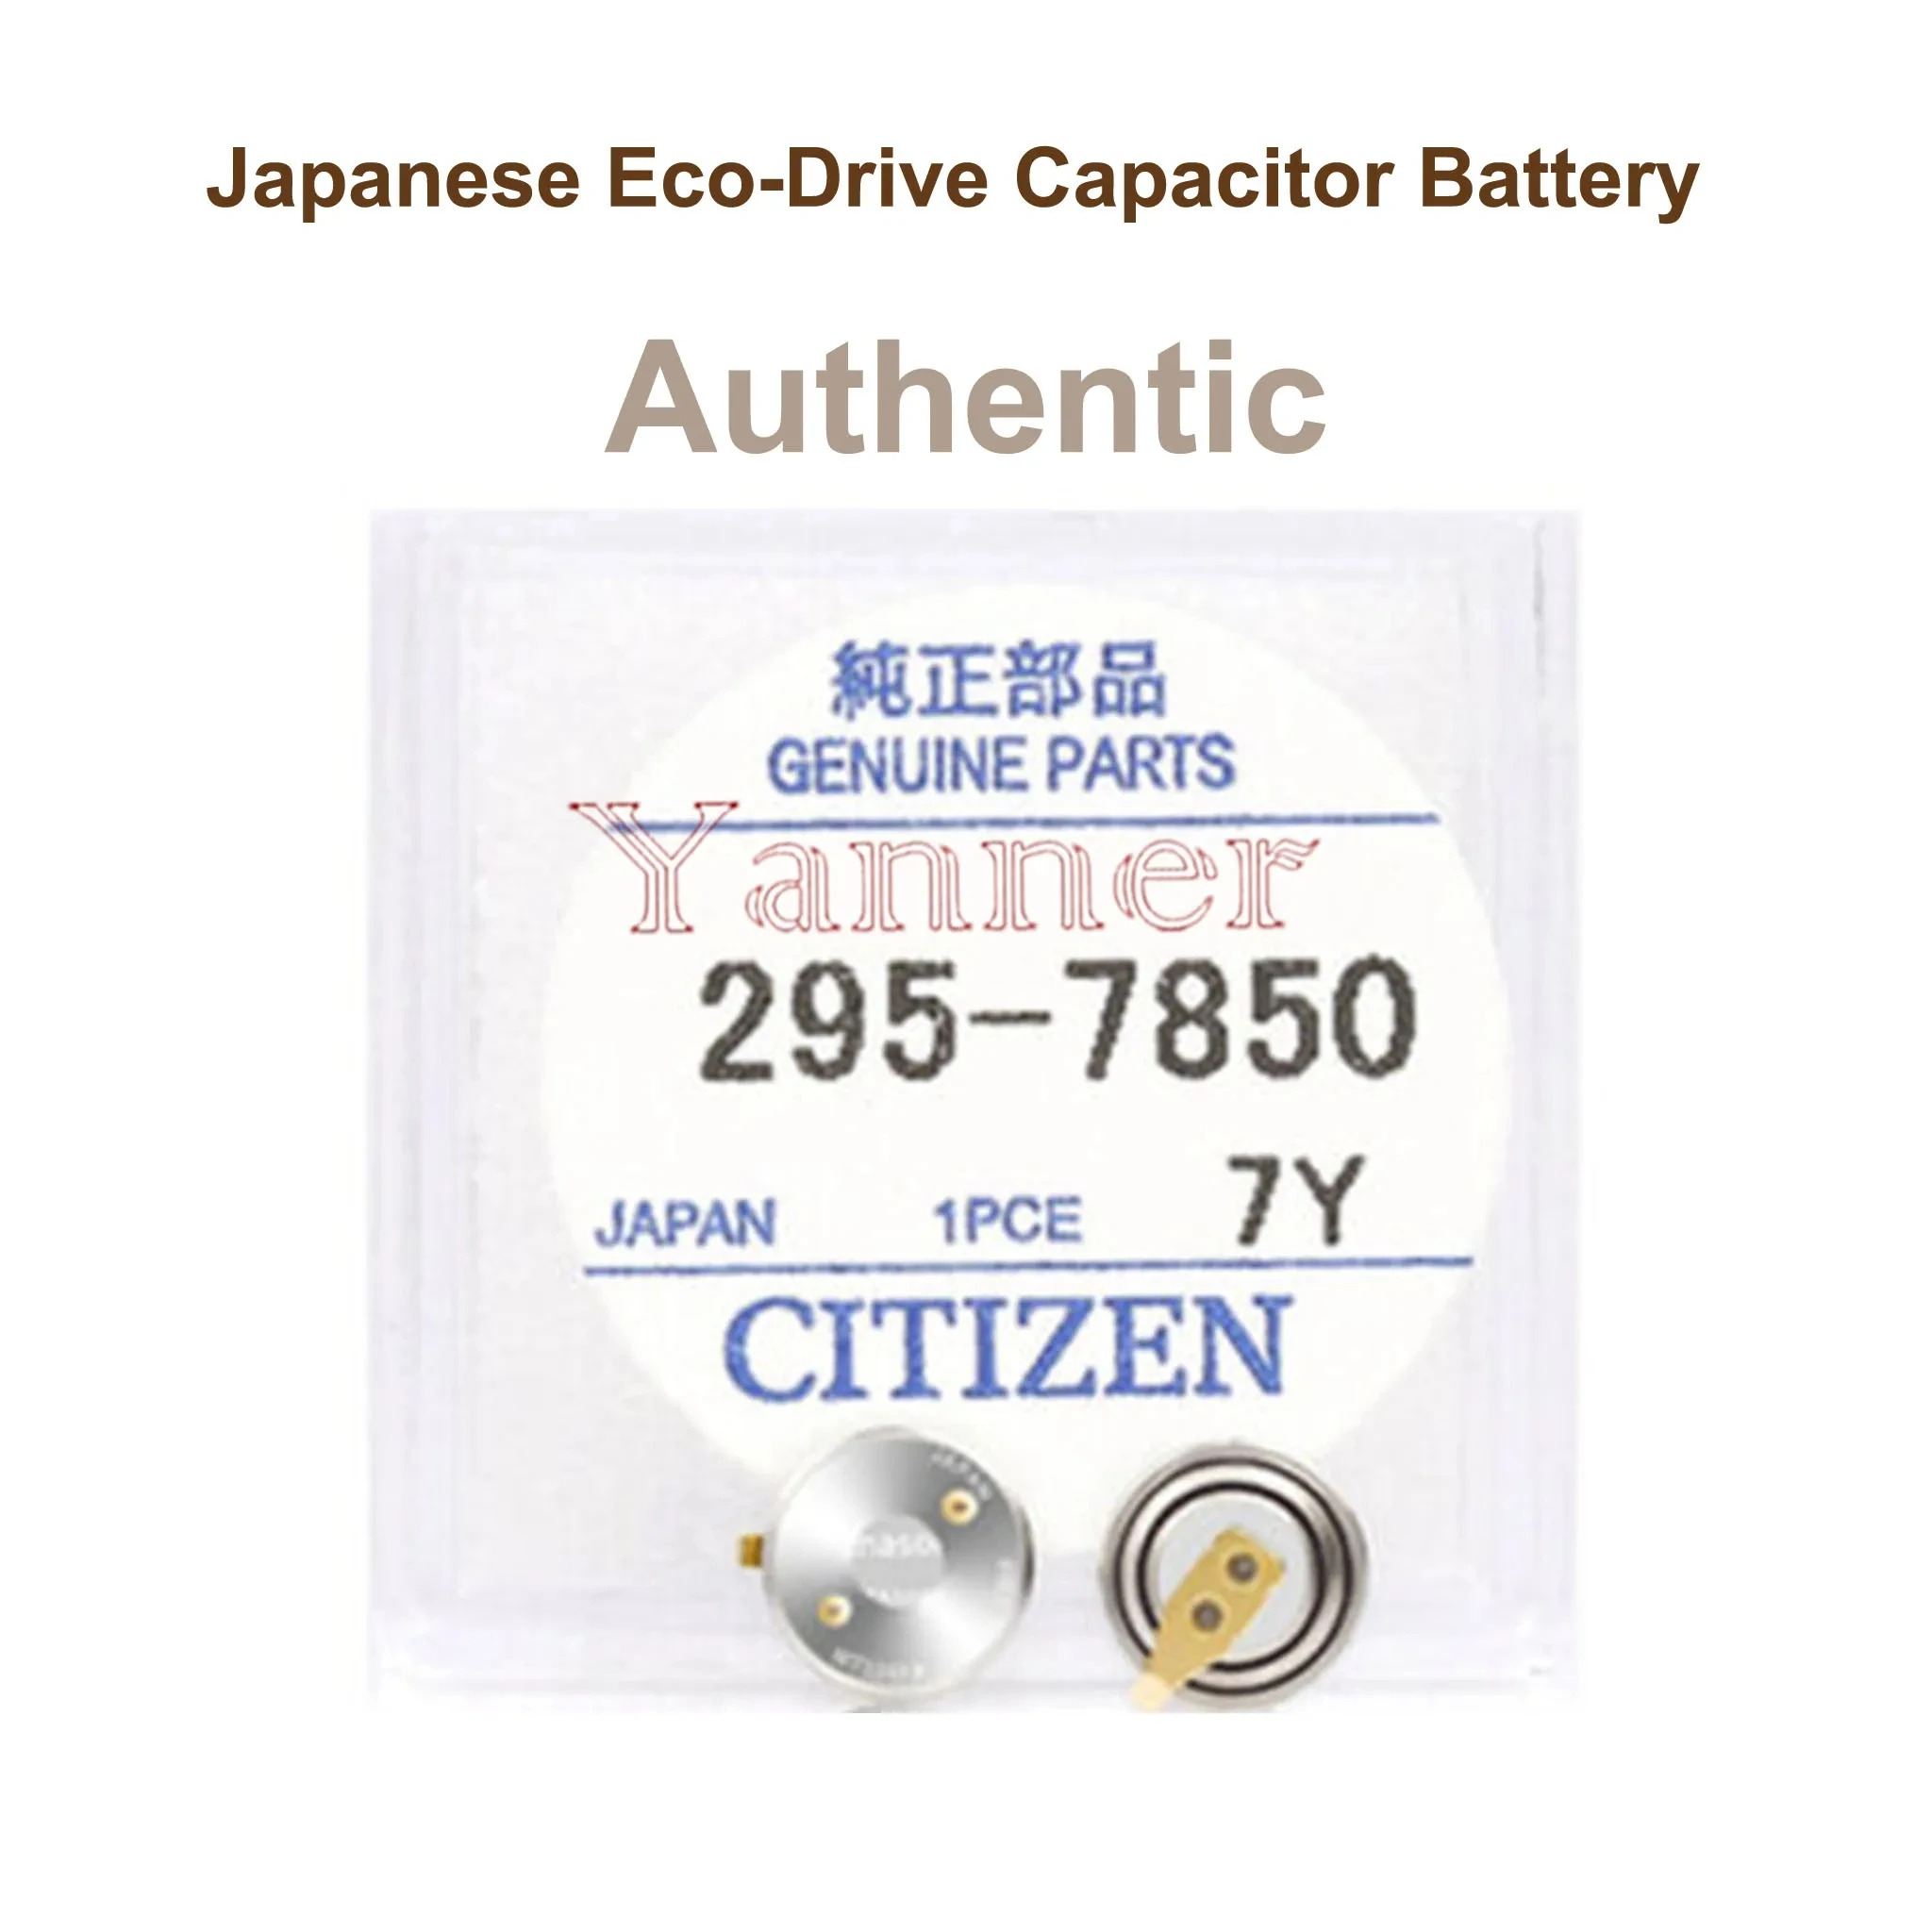 

A+Panasonc Capacitor Battery 295.7850 for Citzen Eco-Drive G820M Watch Part No. 295-7850 Watch Battery Accumulator MT616